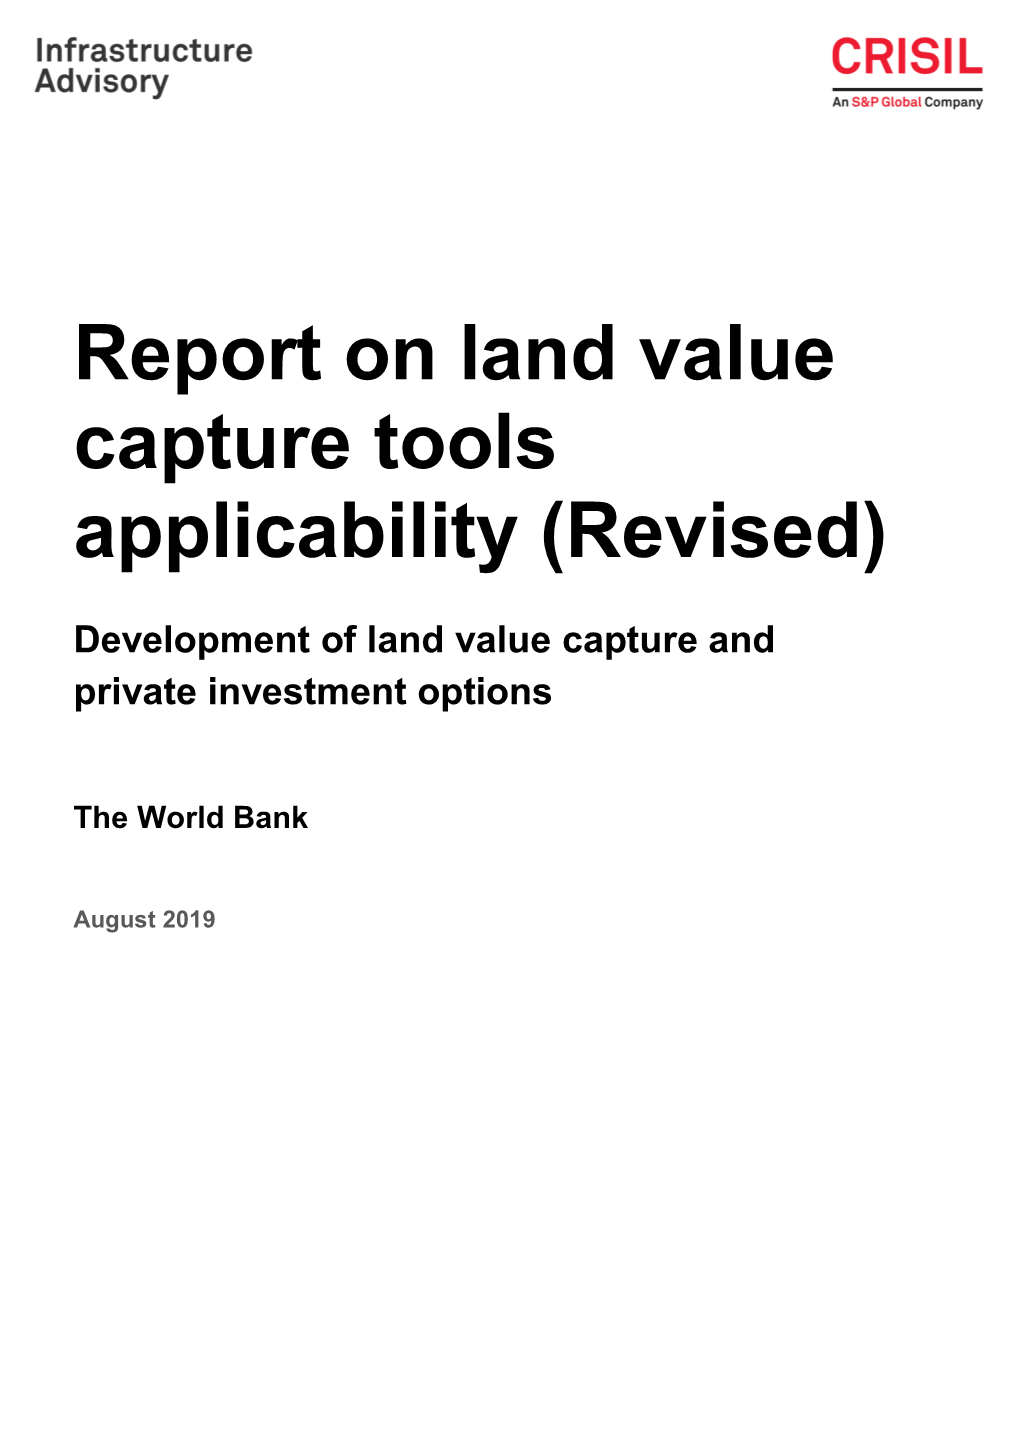 Report on Land Value Capture Tools Applicability (Revised)